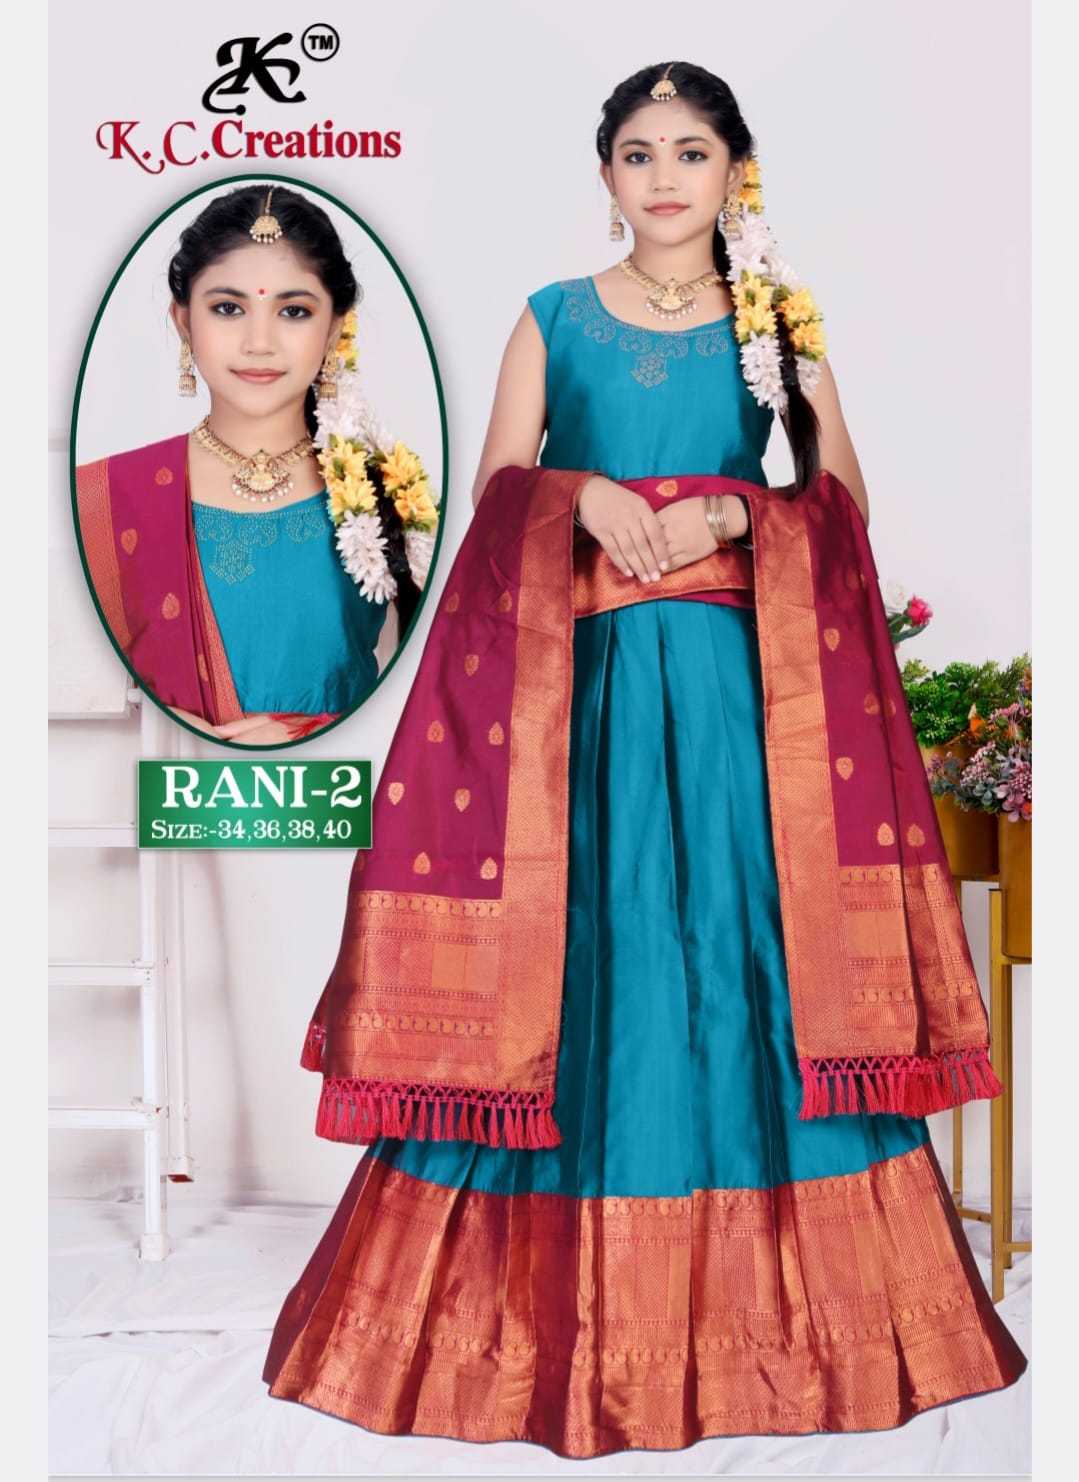 kc creation rani vol 2 kids wear readymade long gown with dupatta supplier